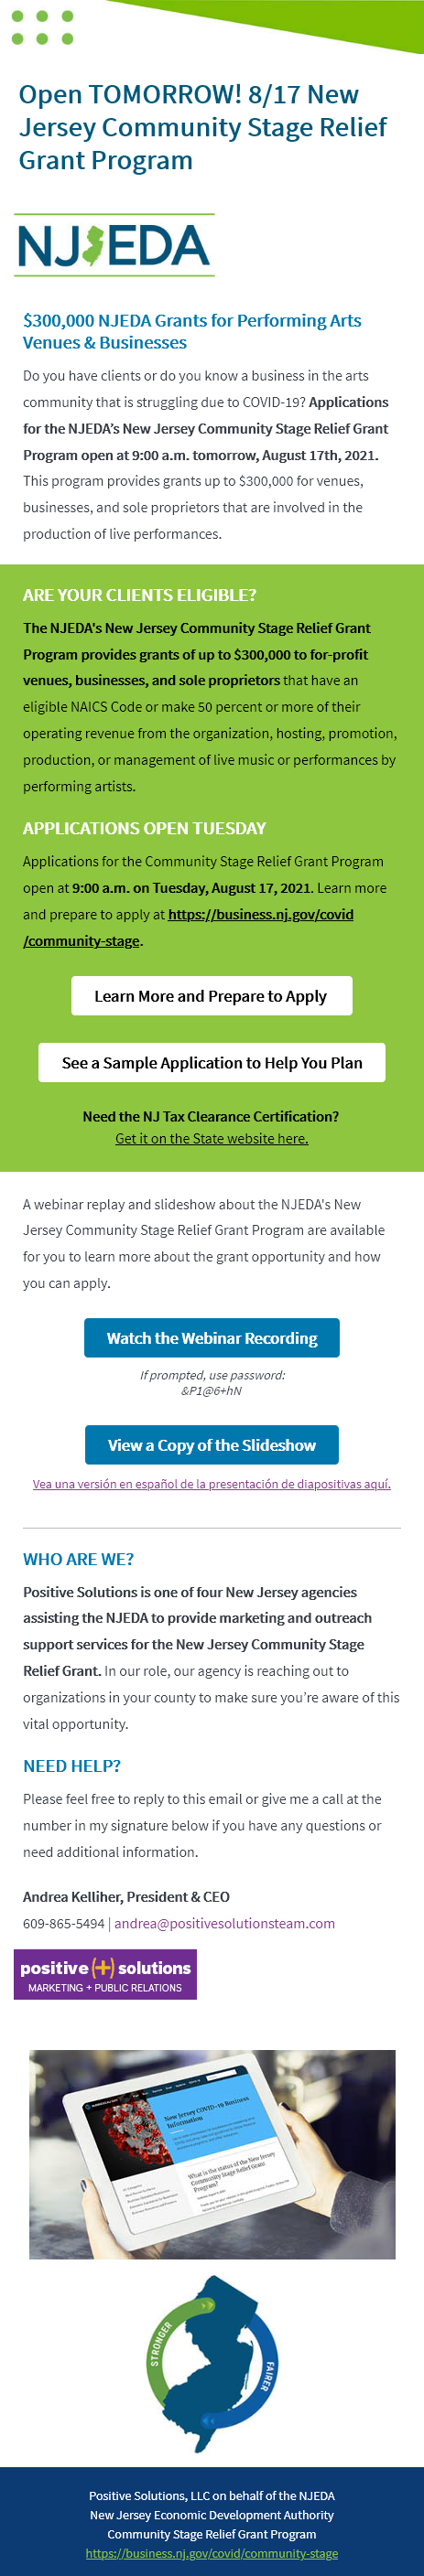 njeda commu stage grant_PS email 2 (mobileview).png